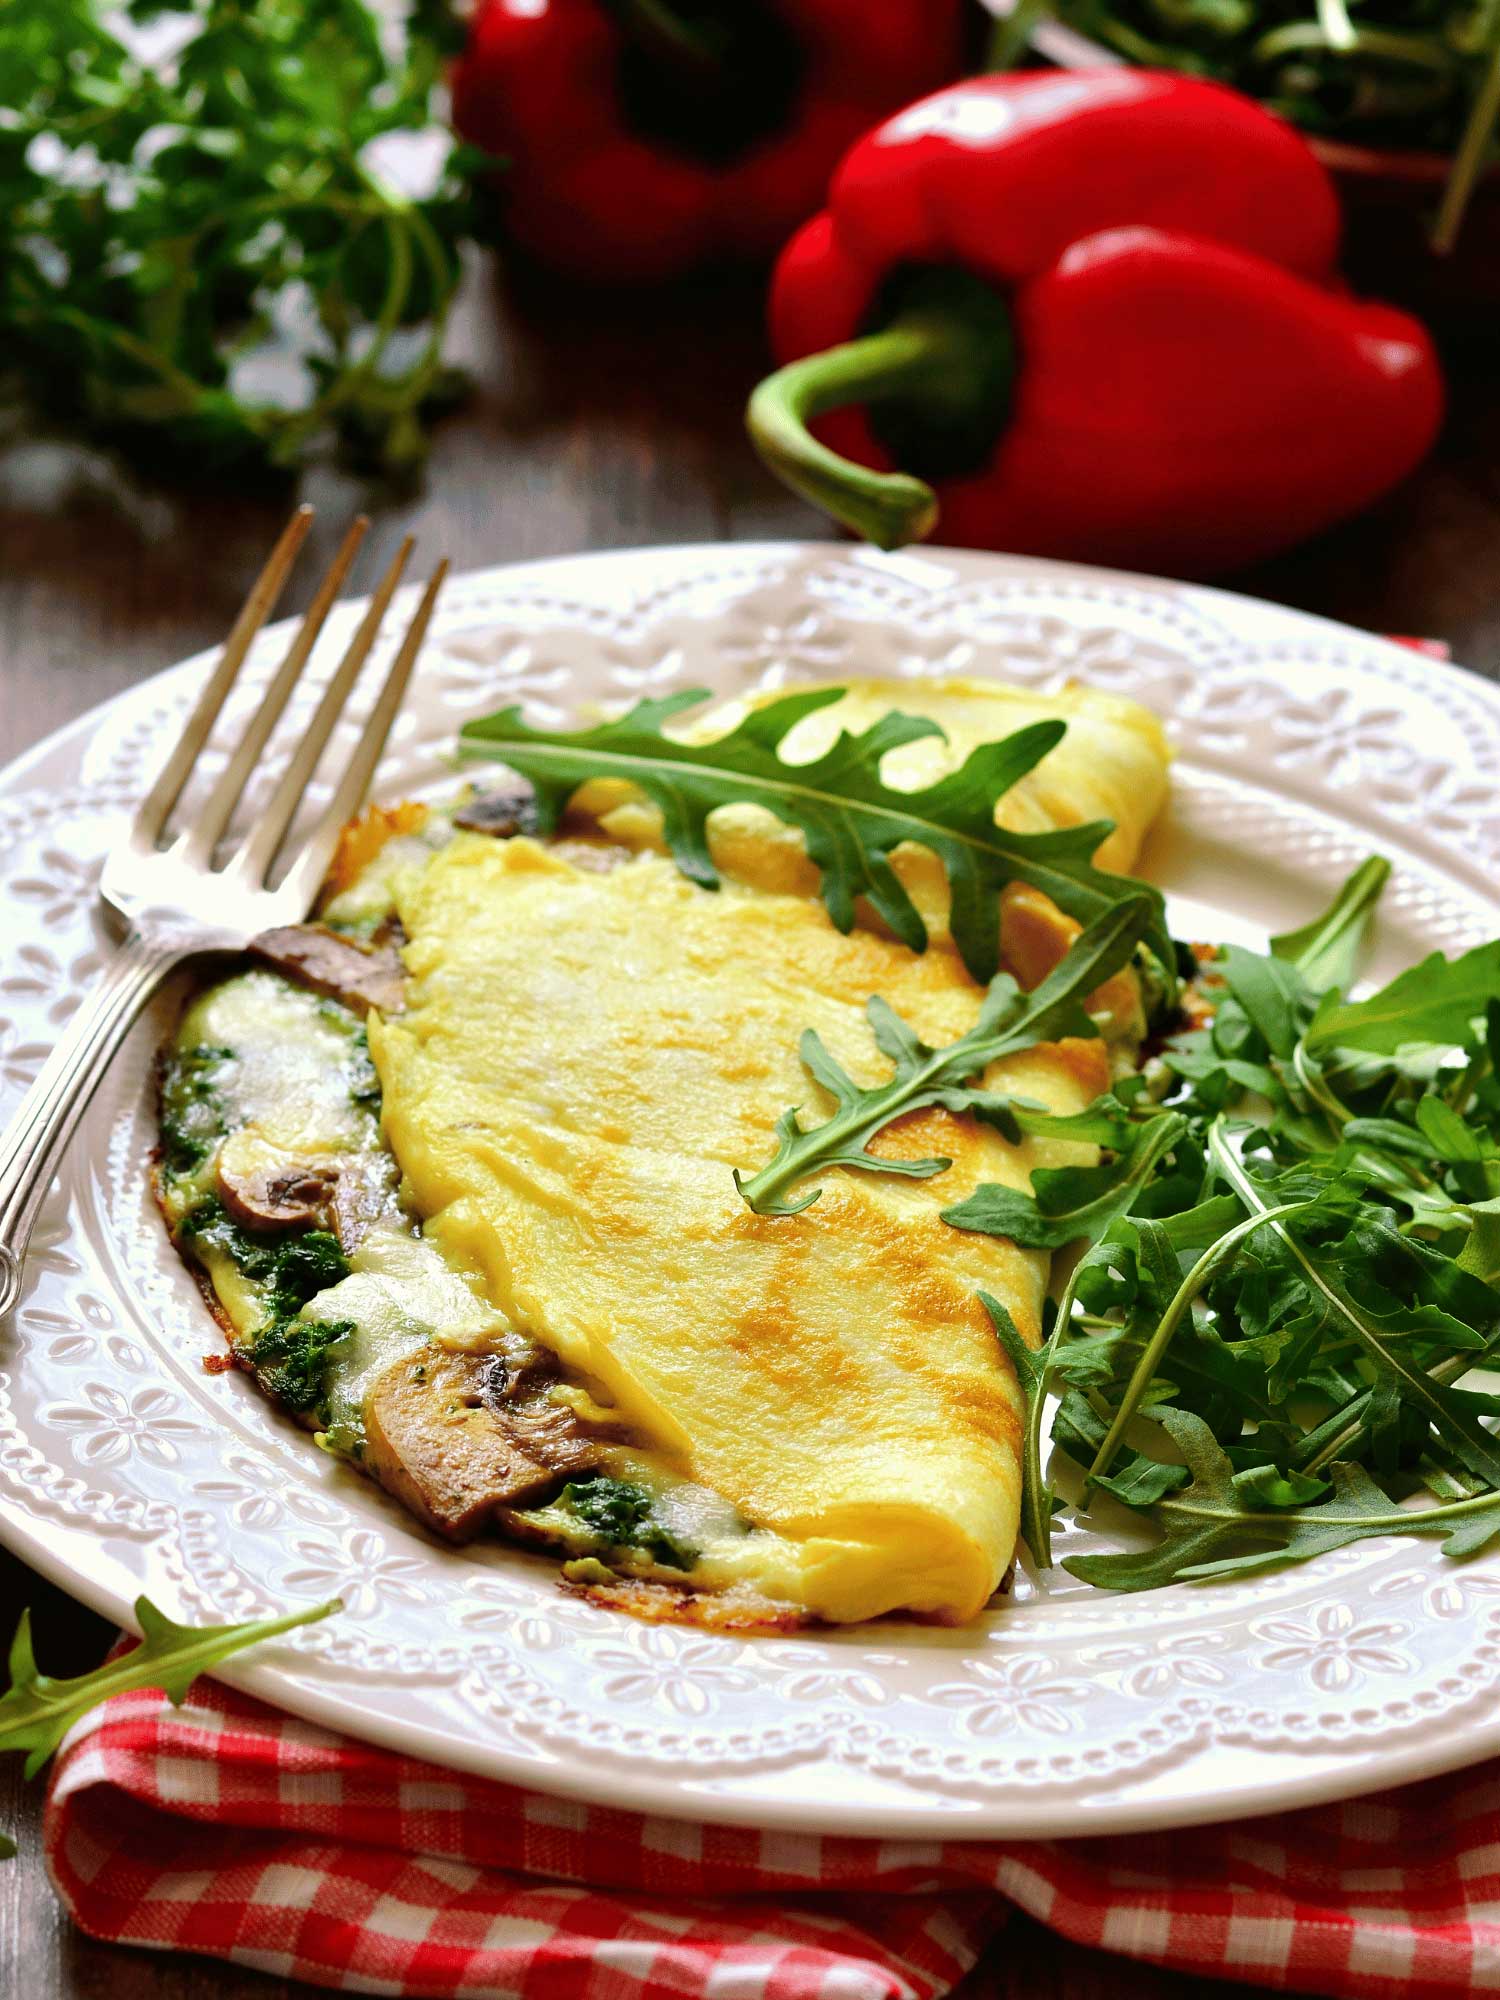 Mushroom And Spinach Frittata Recipe: A Healthy Dinner Option